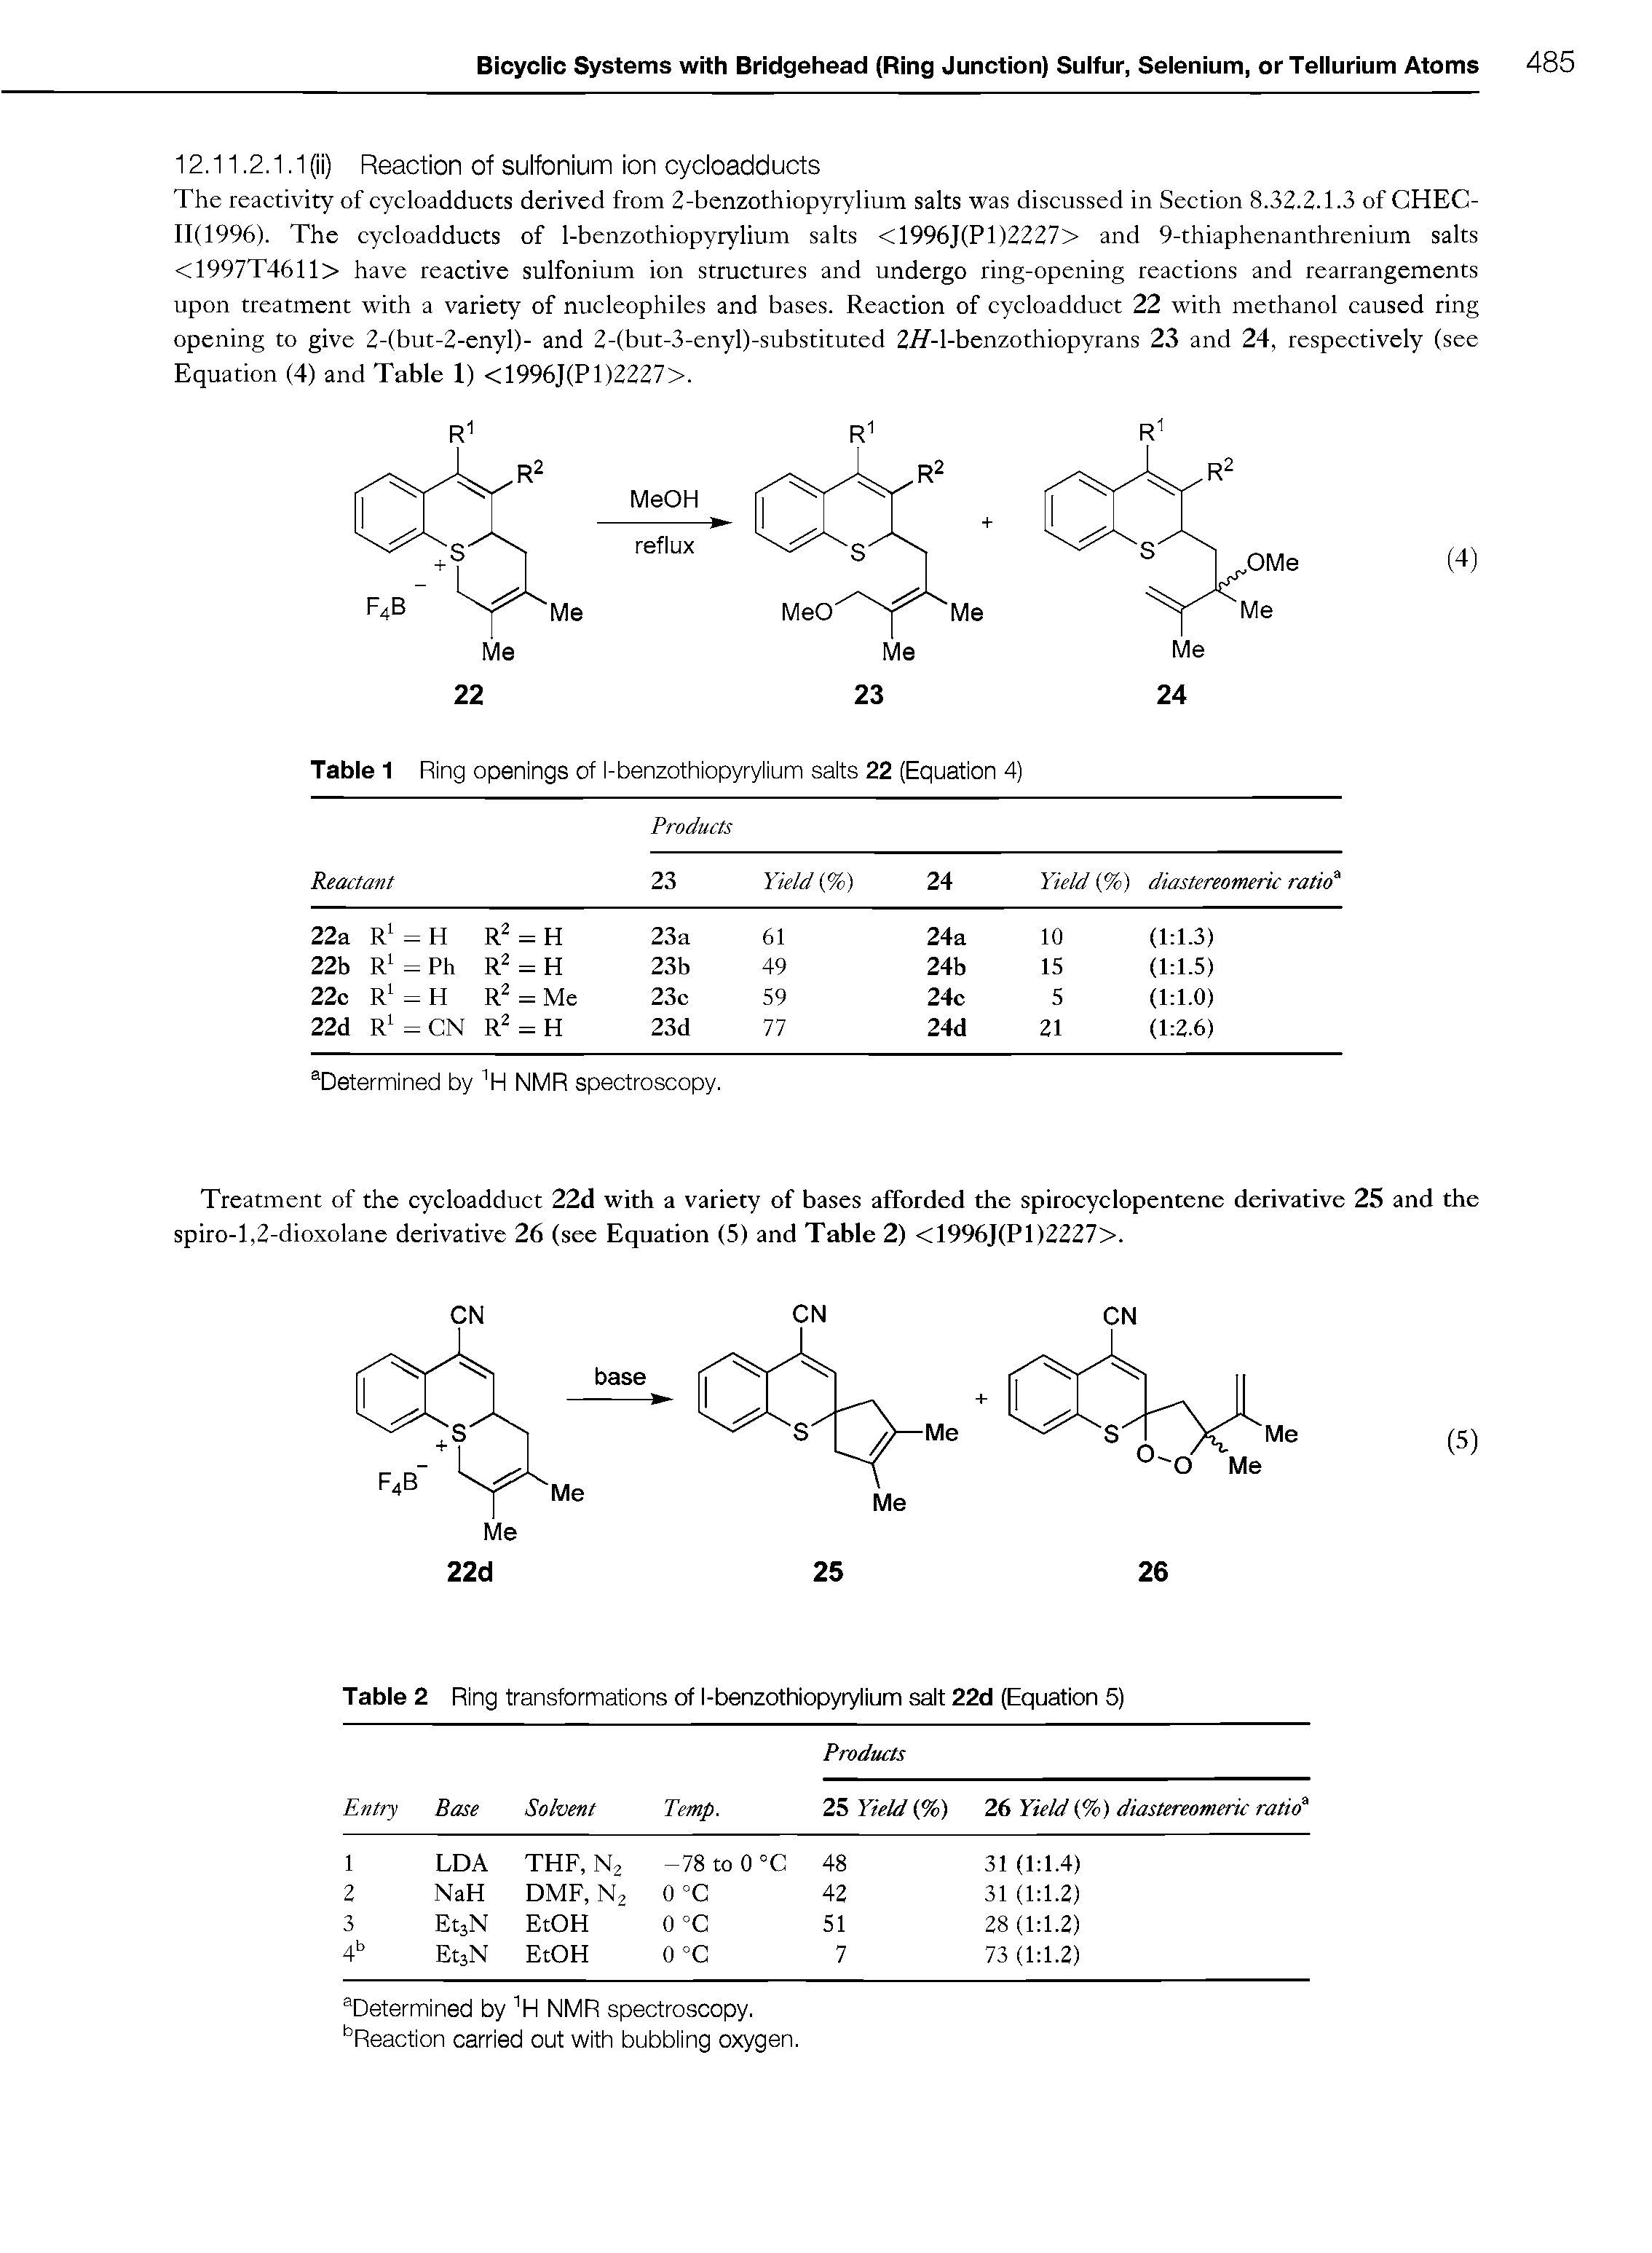 Table 1 Ring openings of l-benzothiopyrylium salts 22 (Equation 4)...